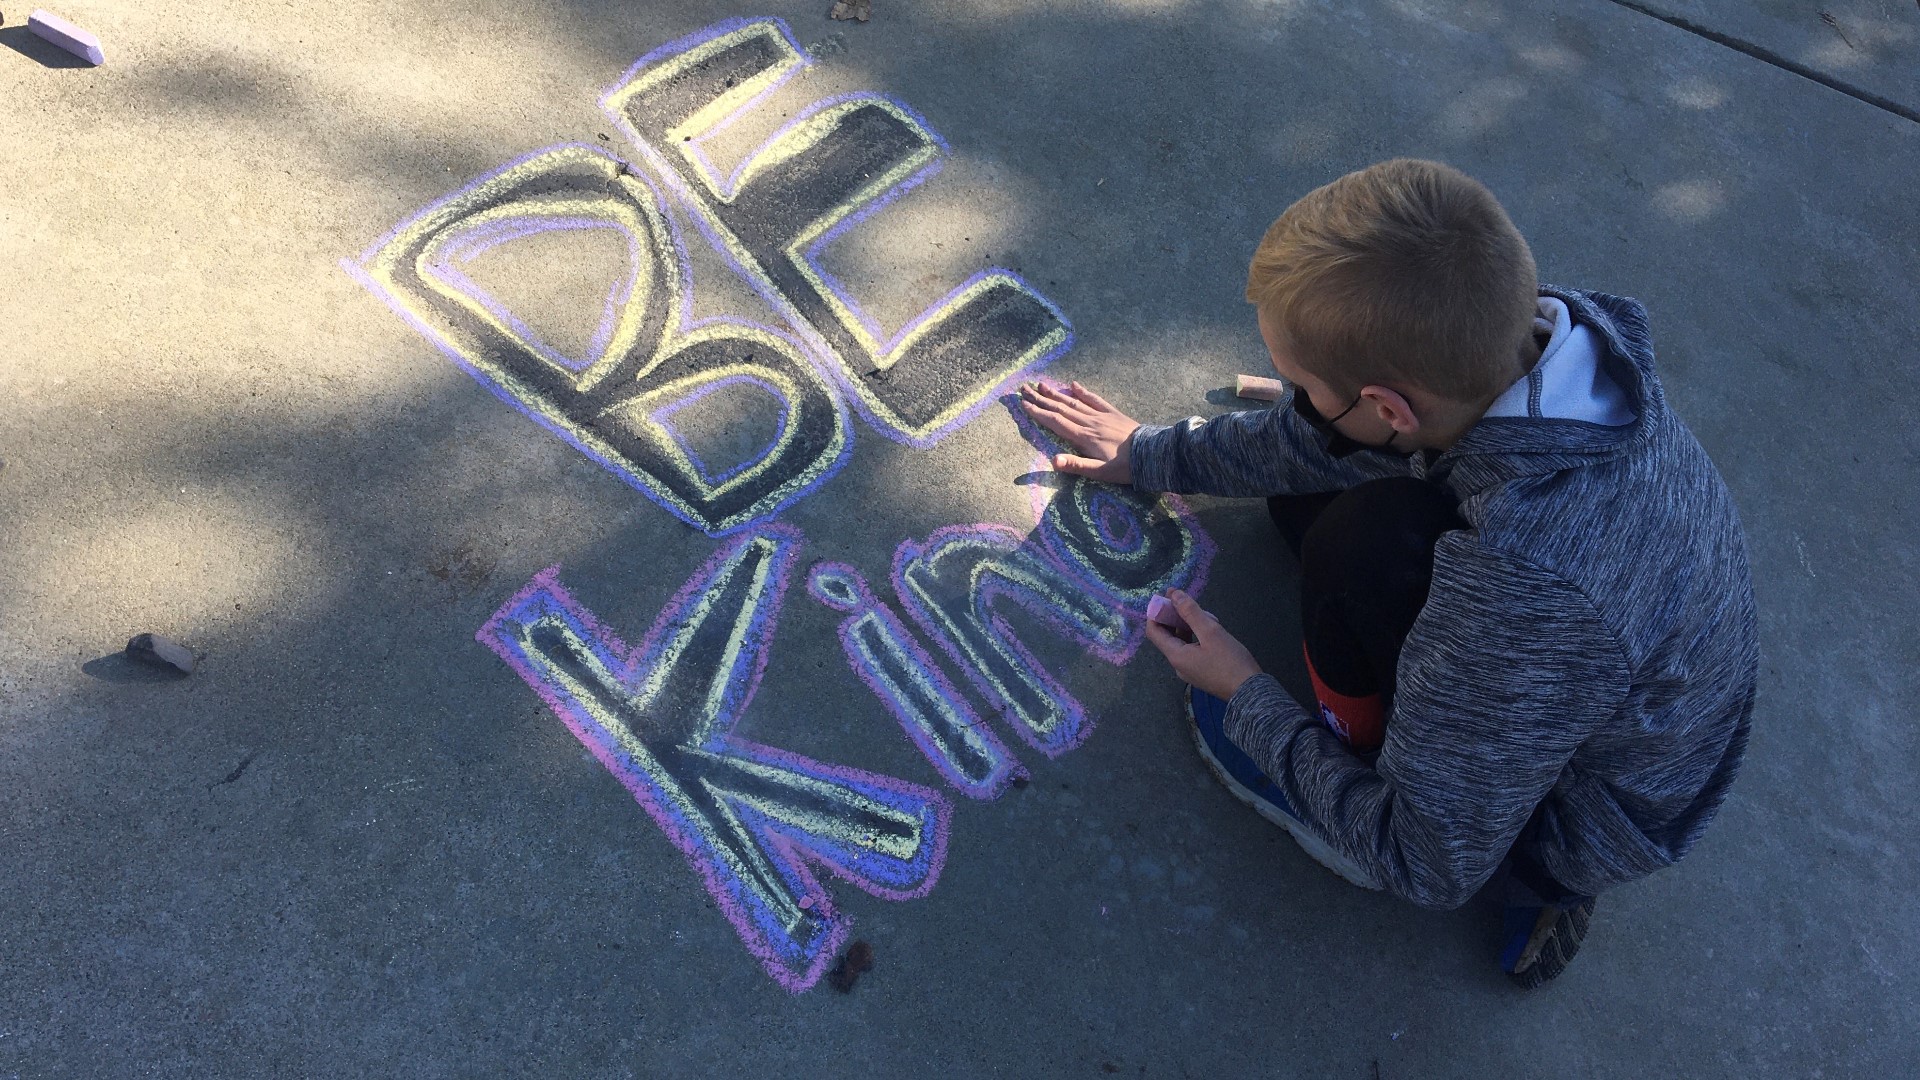 "Spread Love, Not Hate" event brought community members to transform racist graffiti into messages of love.